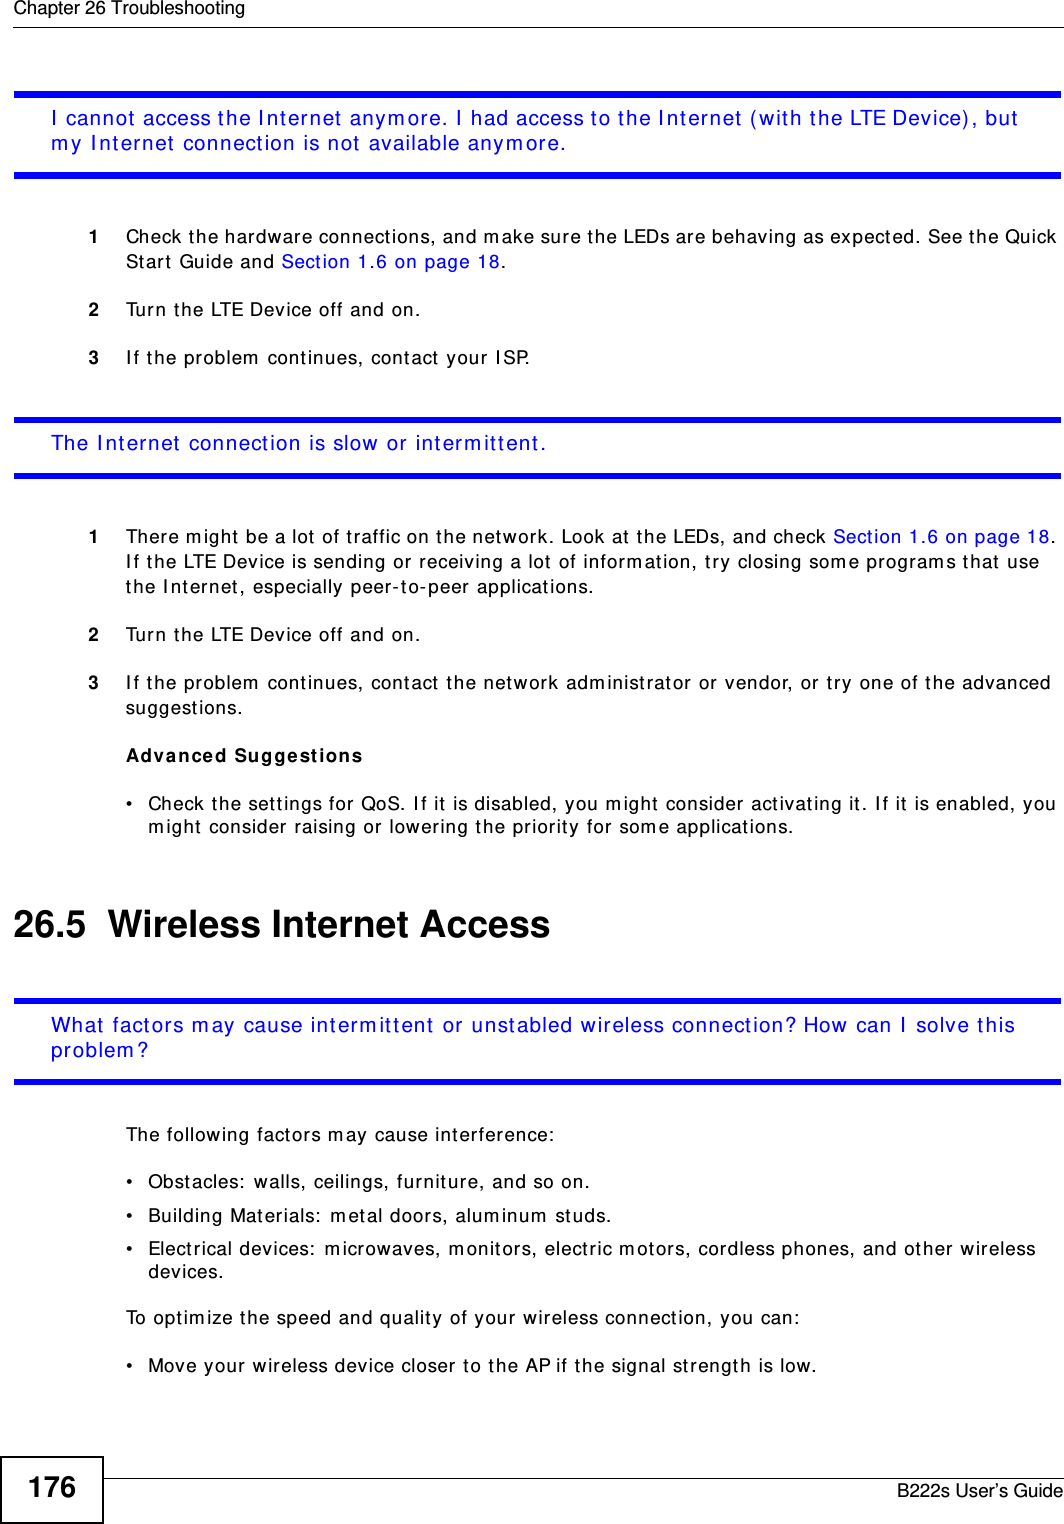 Chapter 26 TroubleshootingB222s User’s Guide176I  cannot  access t he I nt ernet  anym ore. I  had access t o the I nt ernet  (with the LTE Device), but  m y I nt ernet connection is not  available anym ore.1Check the hardware connect ions, and m ake sure t he LEDs are behaving as expect ed. See t he Quick St art  Guide and Section 1.6 on page 18.2Turn t he LTE Device off and on. 3I f t he problem  cont inues, cont act  your I SP. The I nt ernet  connection is slow  or int erm itt ent .1There m ight  be a lot  of t raffic on t he network. Look at  t he LEDs, and check Section 1.6 on page 18. I f t he LTE Device is sending or receiving a lot  of inform at ion, try closing som e program s t hat  use the I nt ernet , especially peer- t o-peer applications. 2Turn t he LTE Device off and on. 3I f t he problem  cont inues, cont act  t he net work adm inistrat or or vendor, or try one of the advanced suggest ions.Adva nced Suggest ions• Check the set tings for QoS. I f it is disabled, you m ight  consider activating it . I f it  is enabled, you m ight  consider raising or  lowering t he priority for som e applicat ions. 26.5  Wireless Internet AccessWhat  factors m ay cause int erm it tent  or unstabled wireless connect ion? How can I  solve t his problem ?The following fact ors m ay cause interference:• Obst acles:  walls, ceilings, furnit ure, and so on.• Building Materials:  m etal doors, alum inum  st uds.• Electrical devices:  m icrowaves, m onitors, elect ric m ot ors, cordless phones, and ot her wireless devices.To optim ize t he speed and qualit y of your wireless connect ion, you can:• Move your wireless device closer to t he AP if t he signal st rengt h is low.